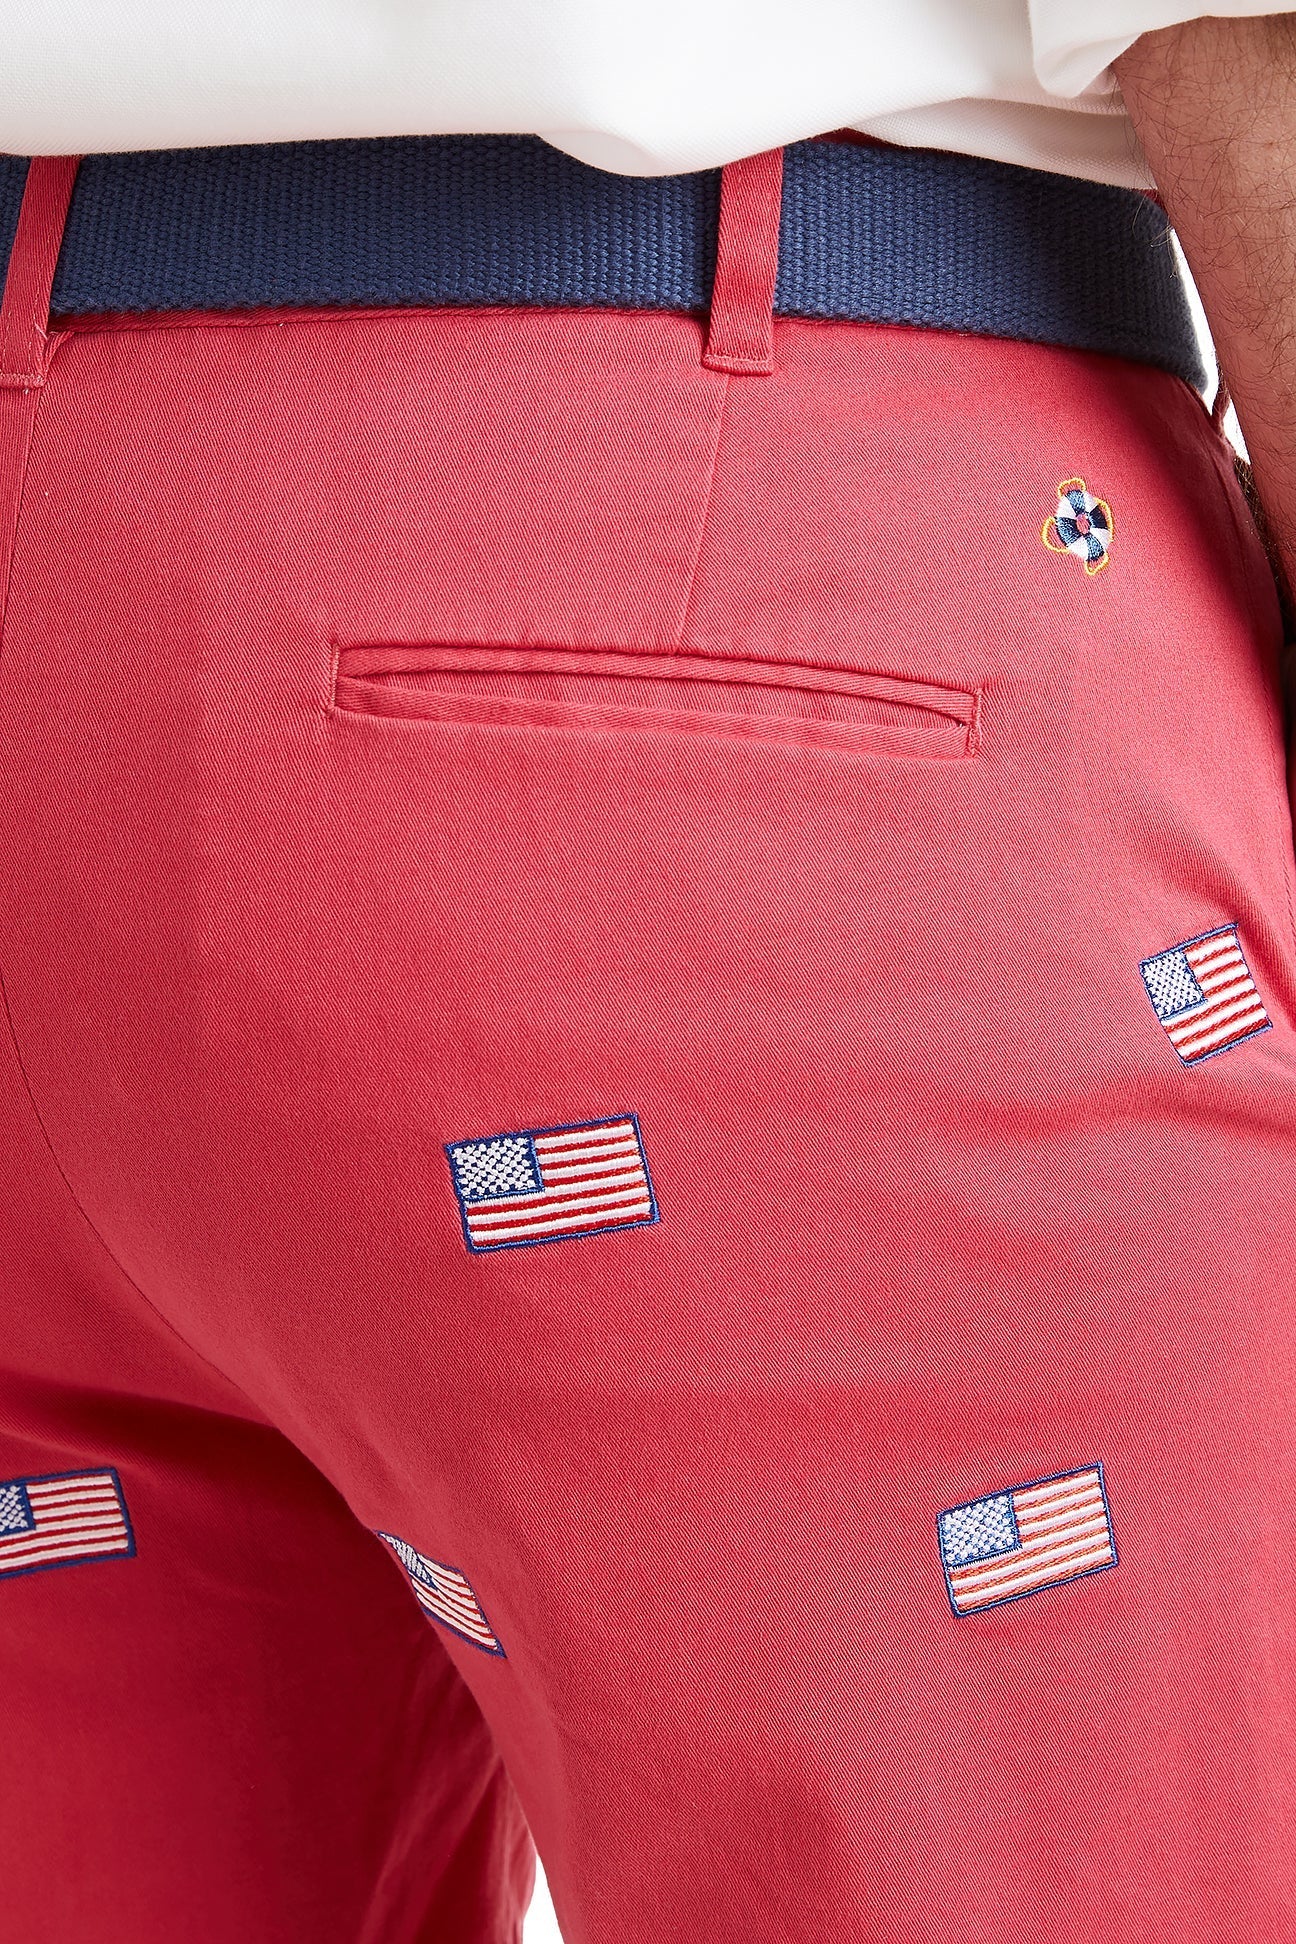 Cisco Short Hurricane Red with American Flag MENS EMBROIDERED SHORTS Castaway Nantucket Island